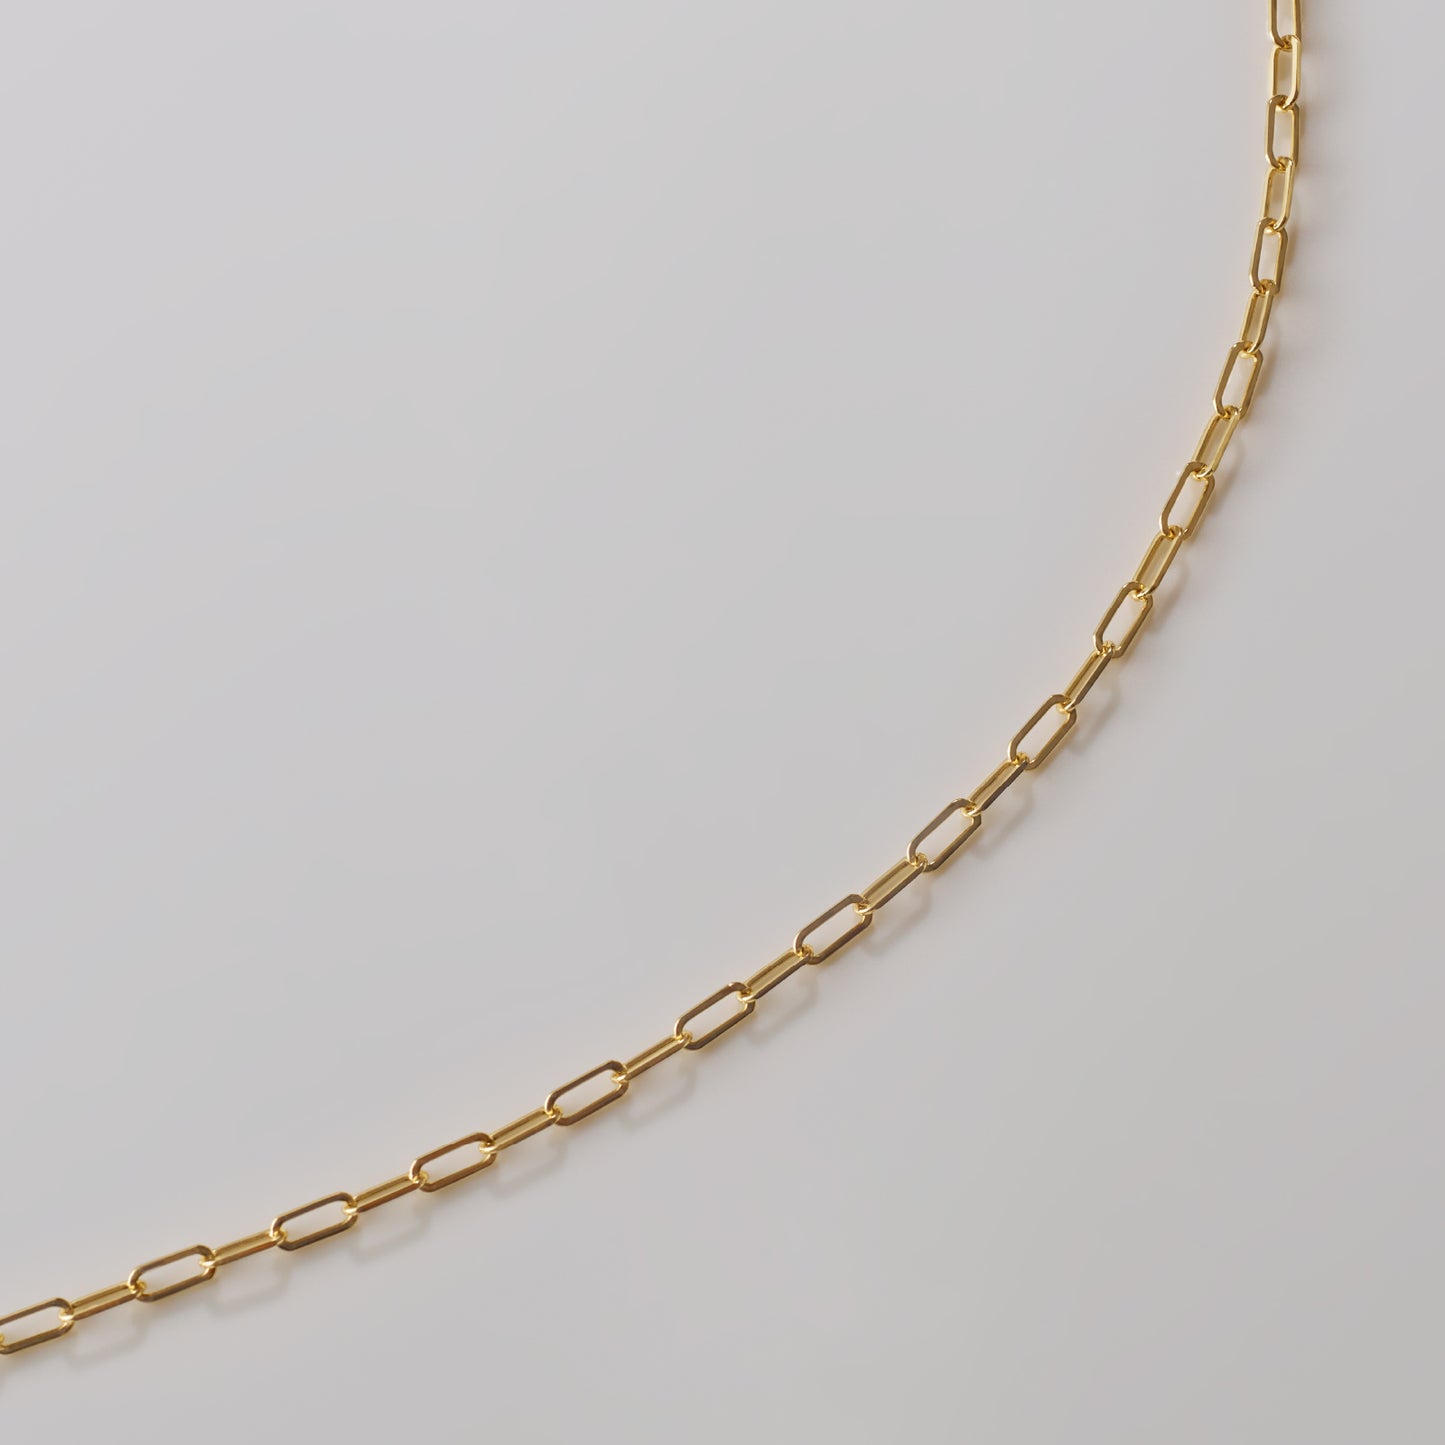 loquaxマタニティジュエリーセット ゴールド（Babyring Gold × Necklace Gold）